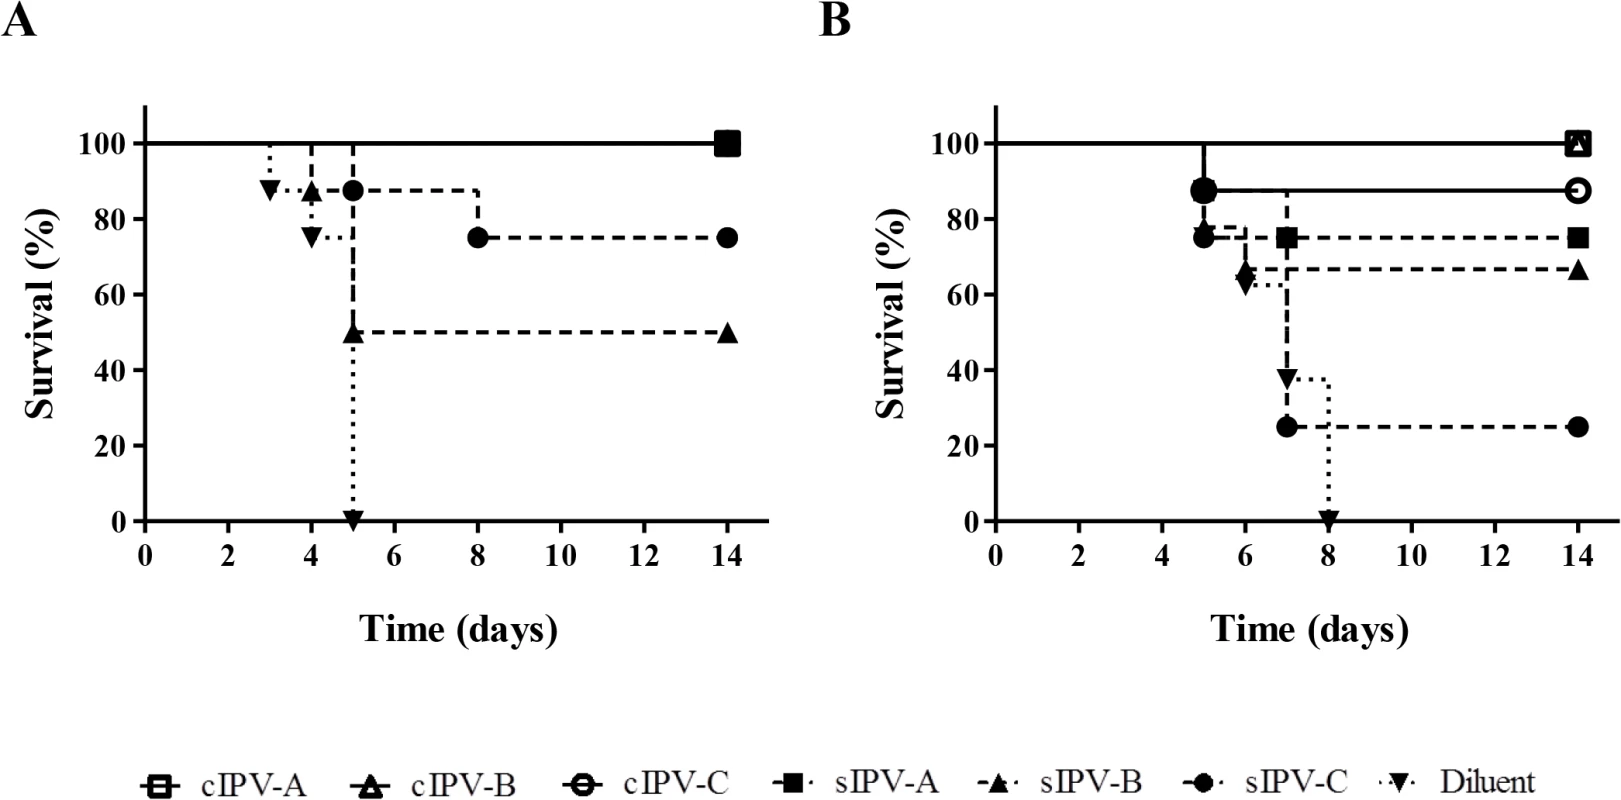 Survival curve analysis of Tg21-bx mice immunised with IPV and challenged with paralytic doses of poliovirus.